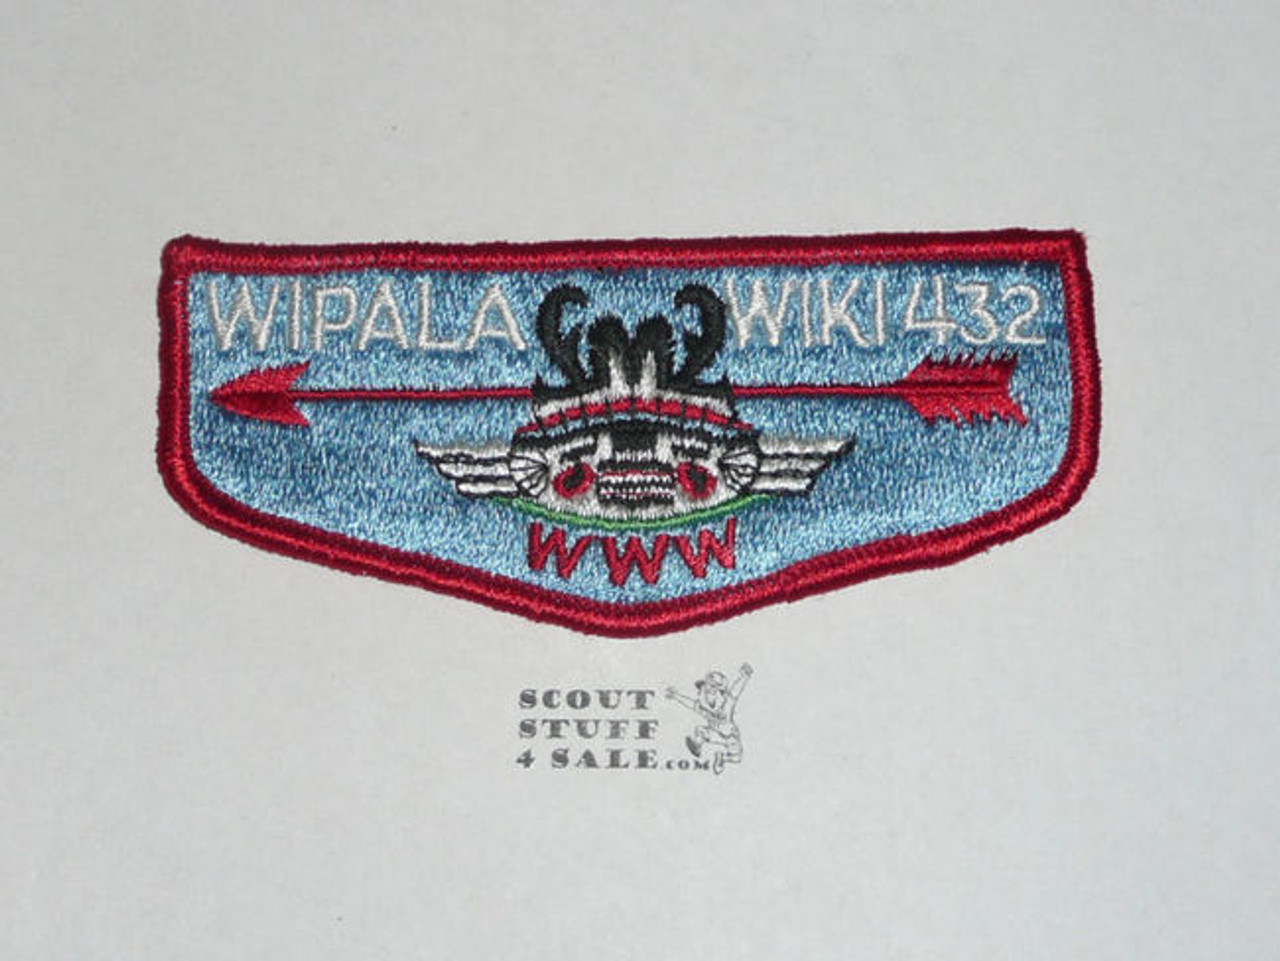 Embroidered patch - Wikipedia